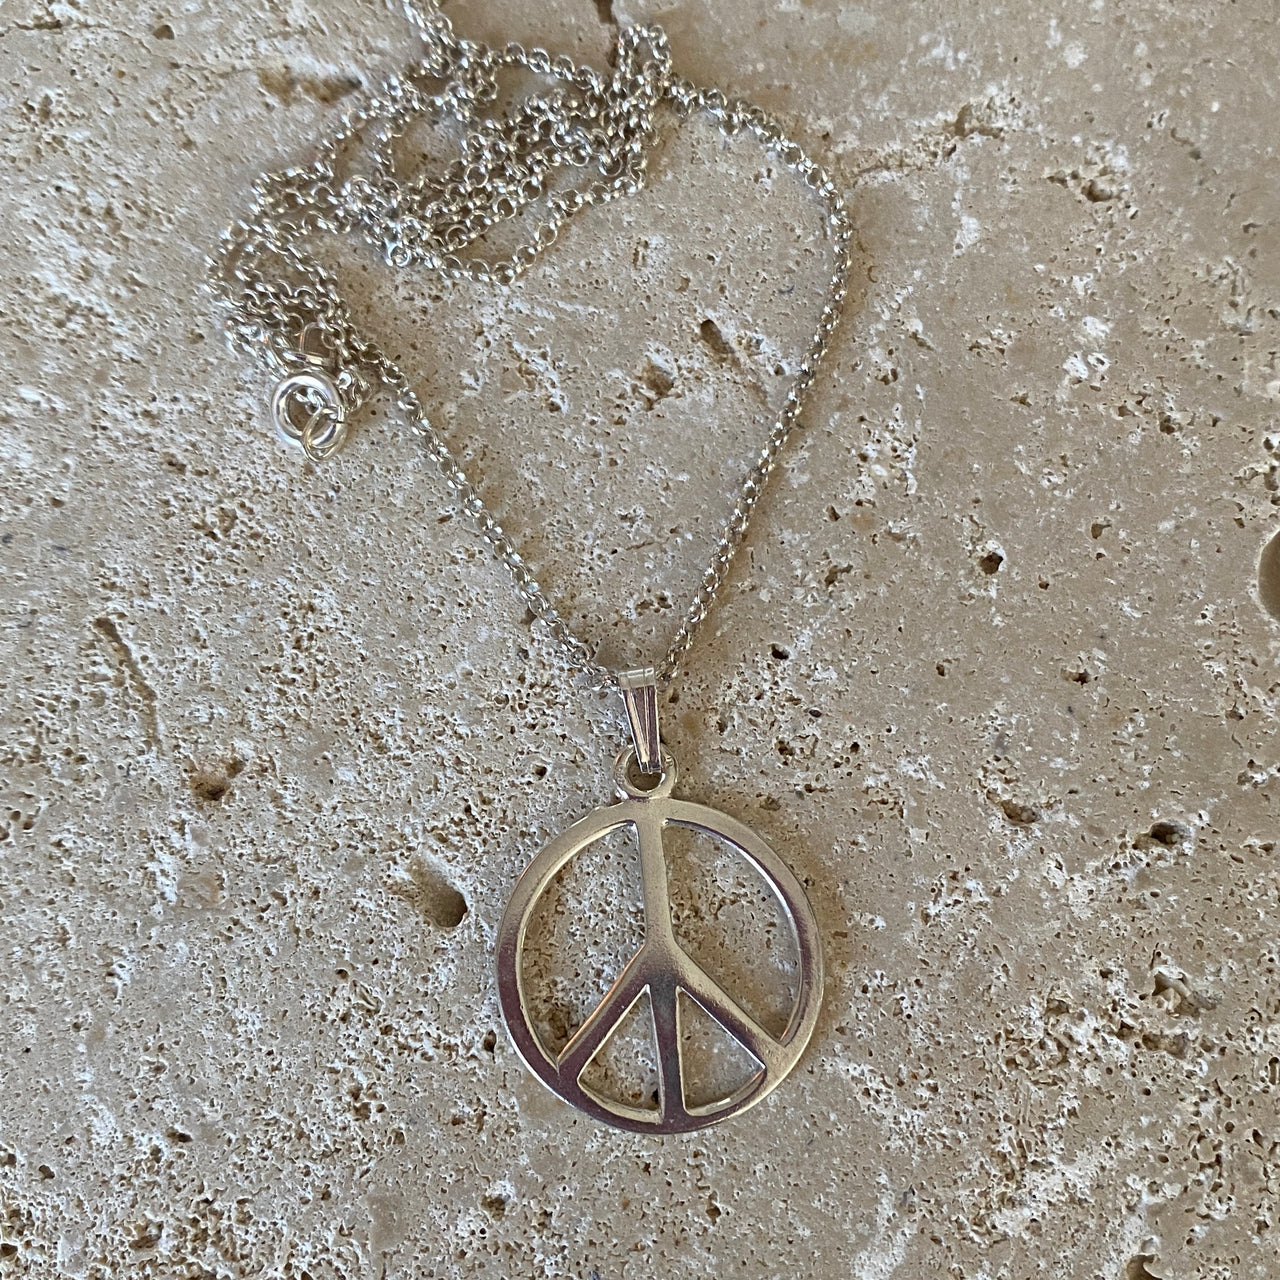 Sterling Silver Peace Charm Necklace - Empaness